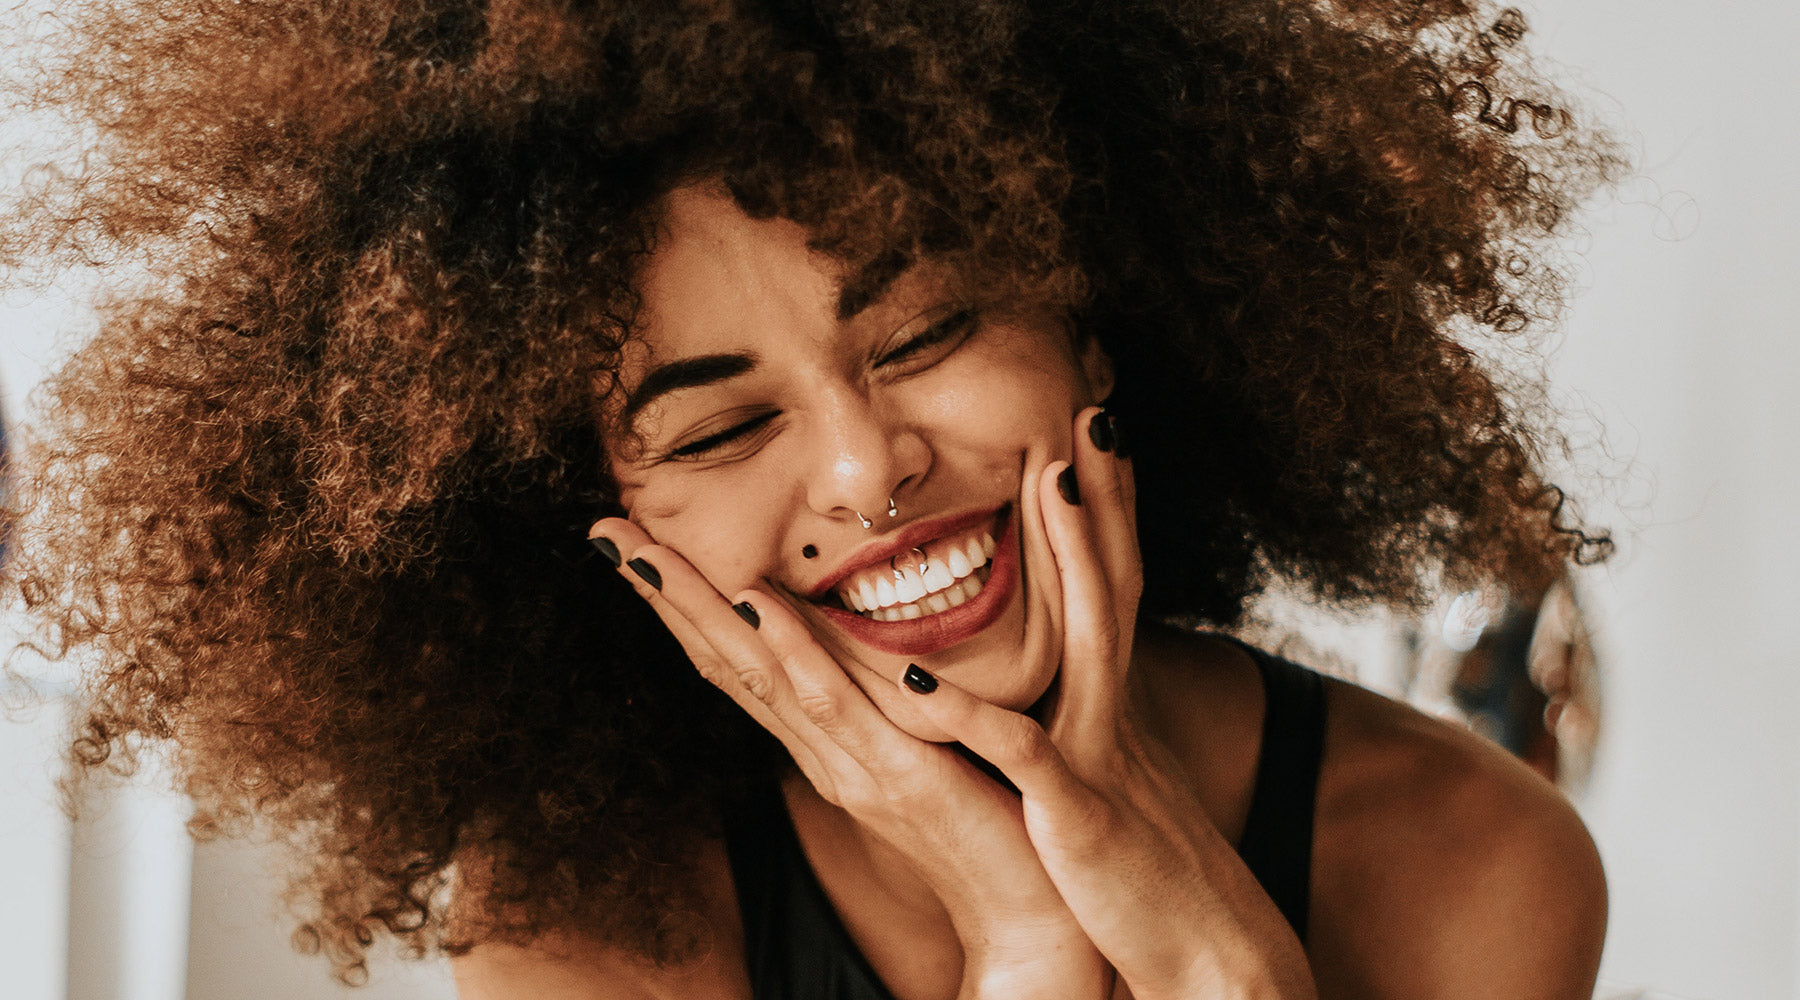 Woman laughing and smiling